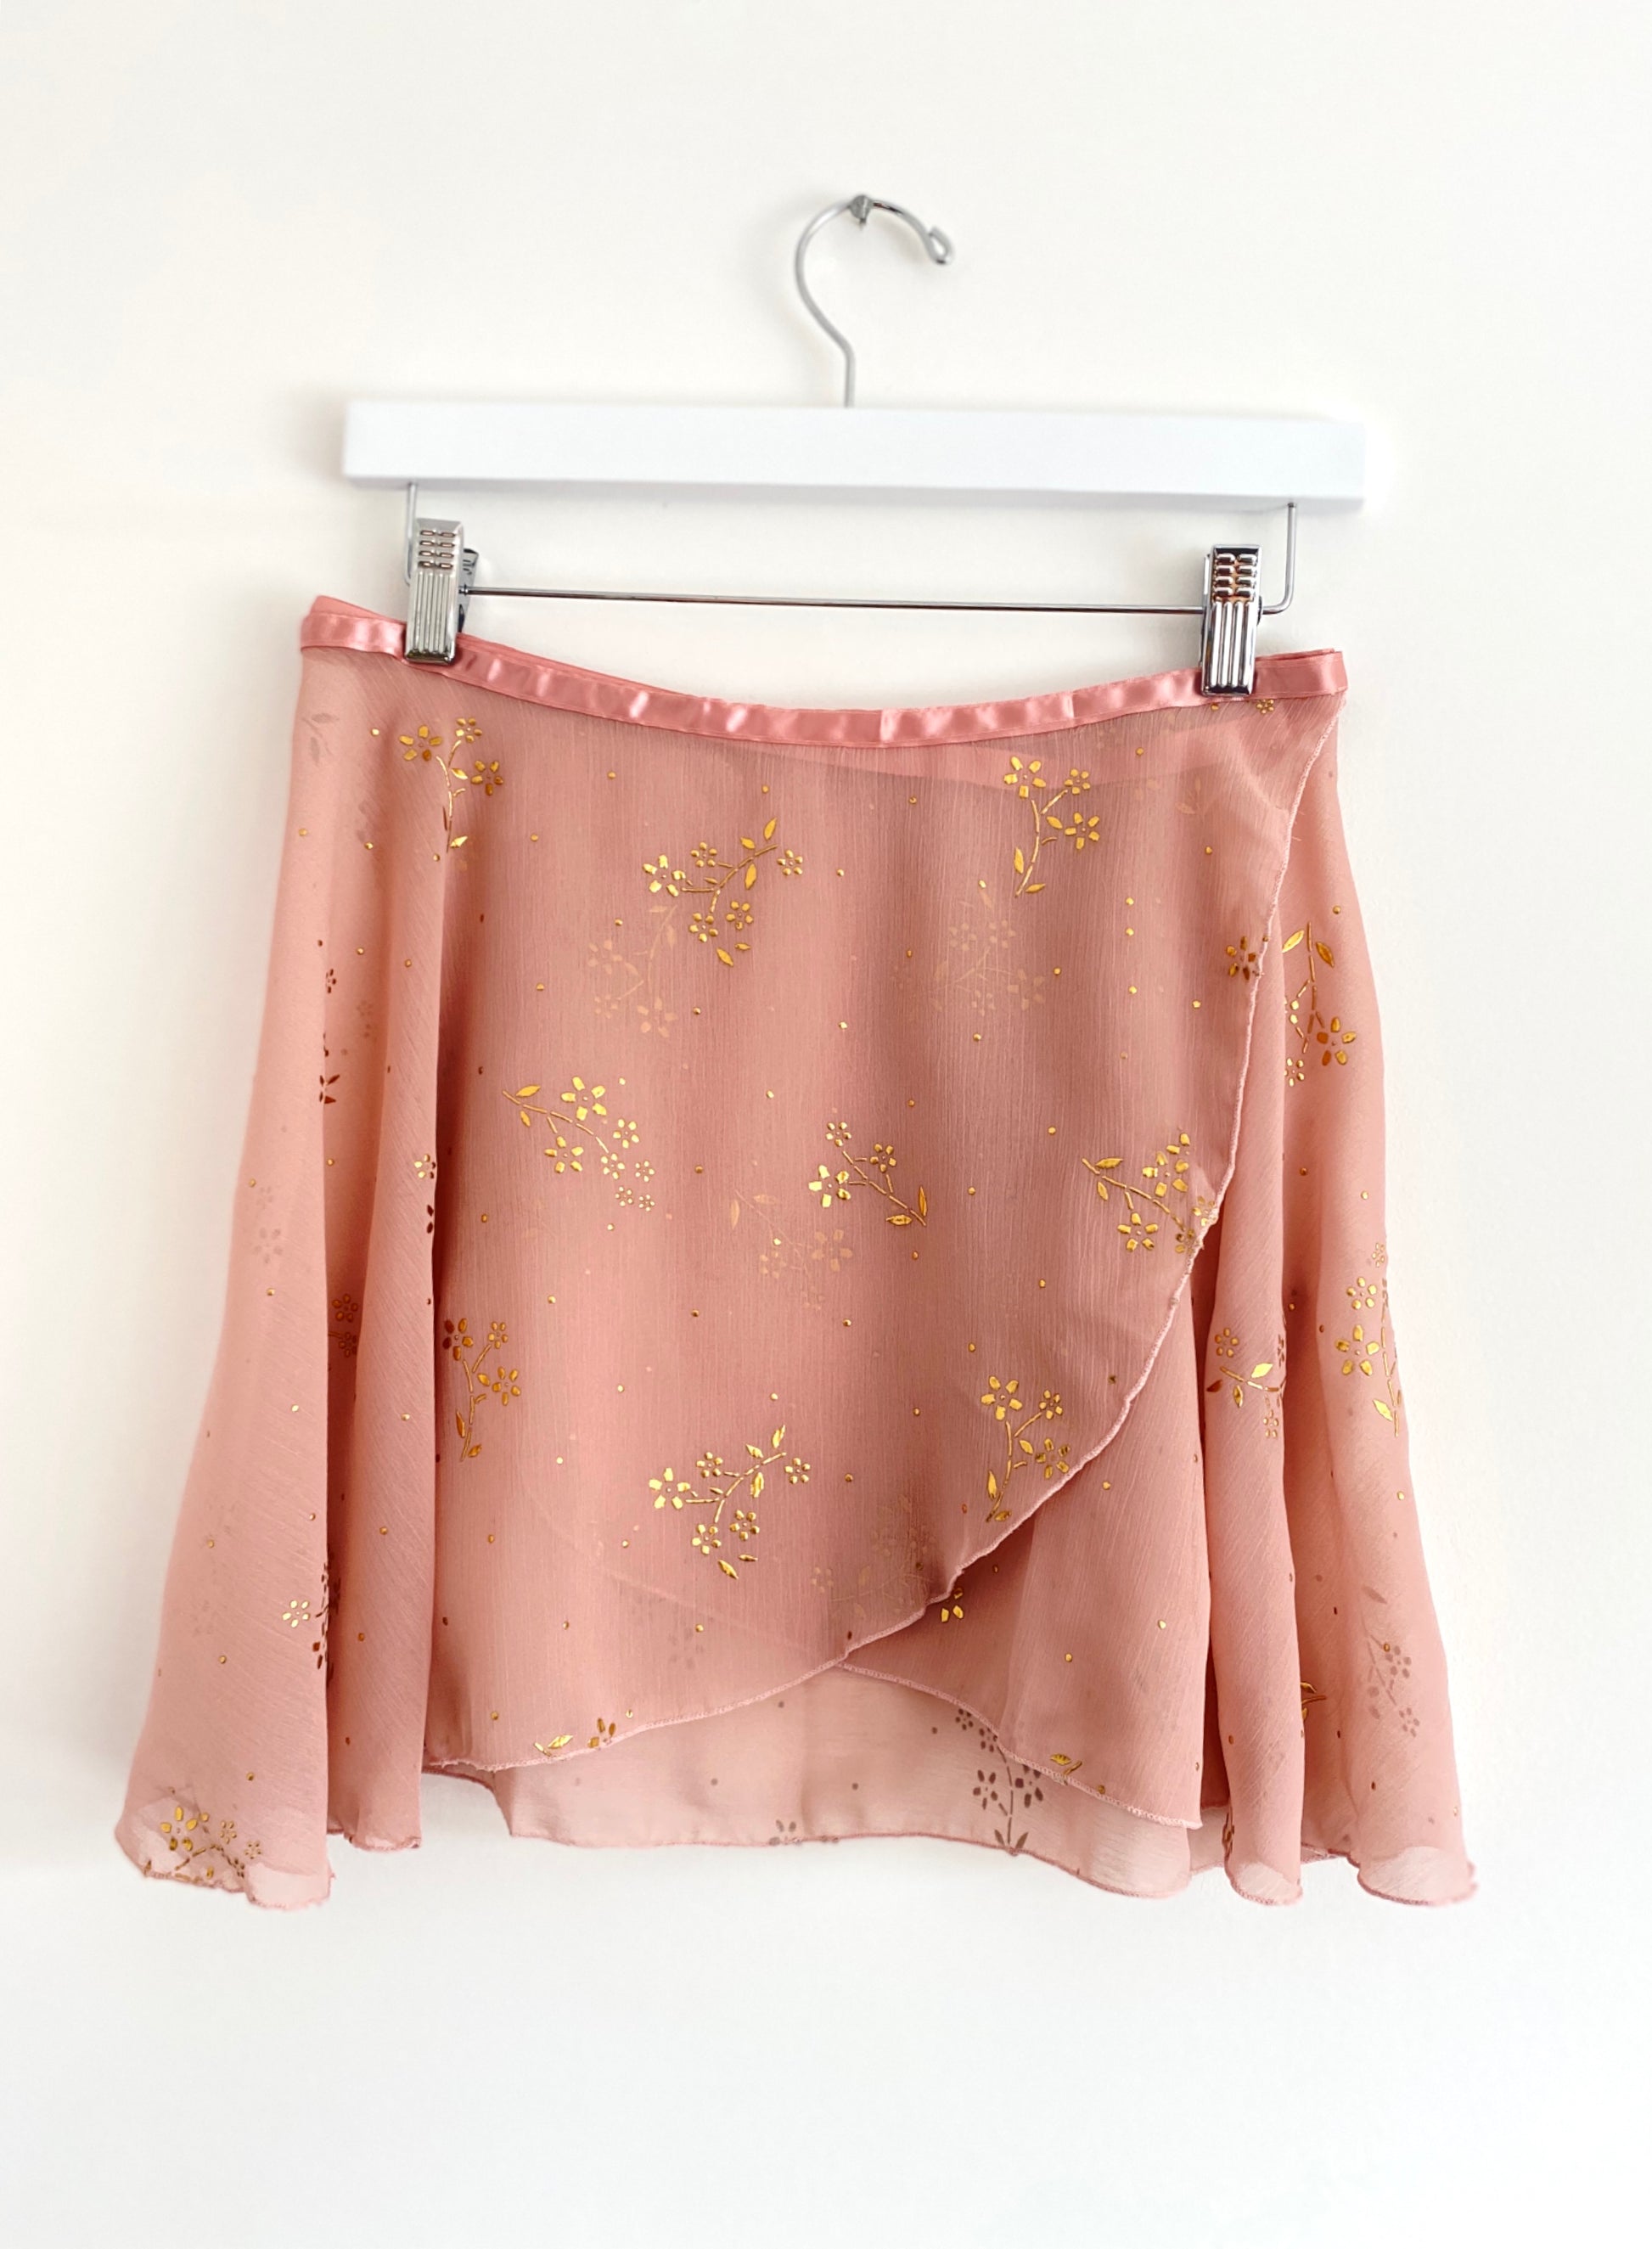 Wrap skirt for Ballet in chiffon. Dusky pink with gold pattern from The Collective Dancewear